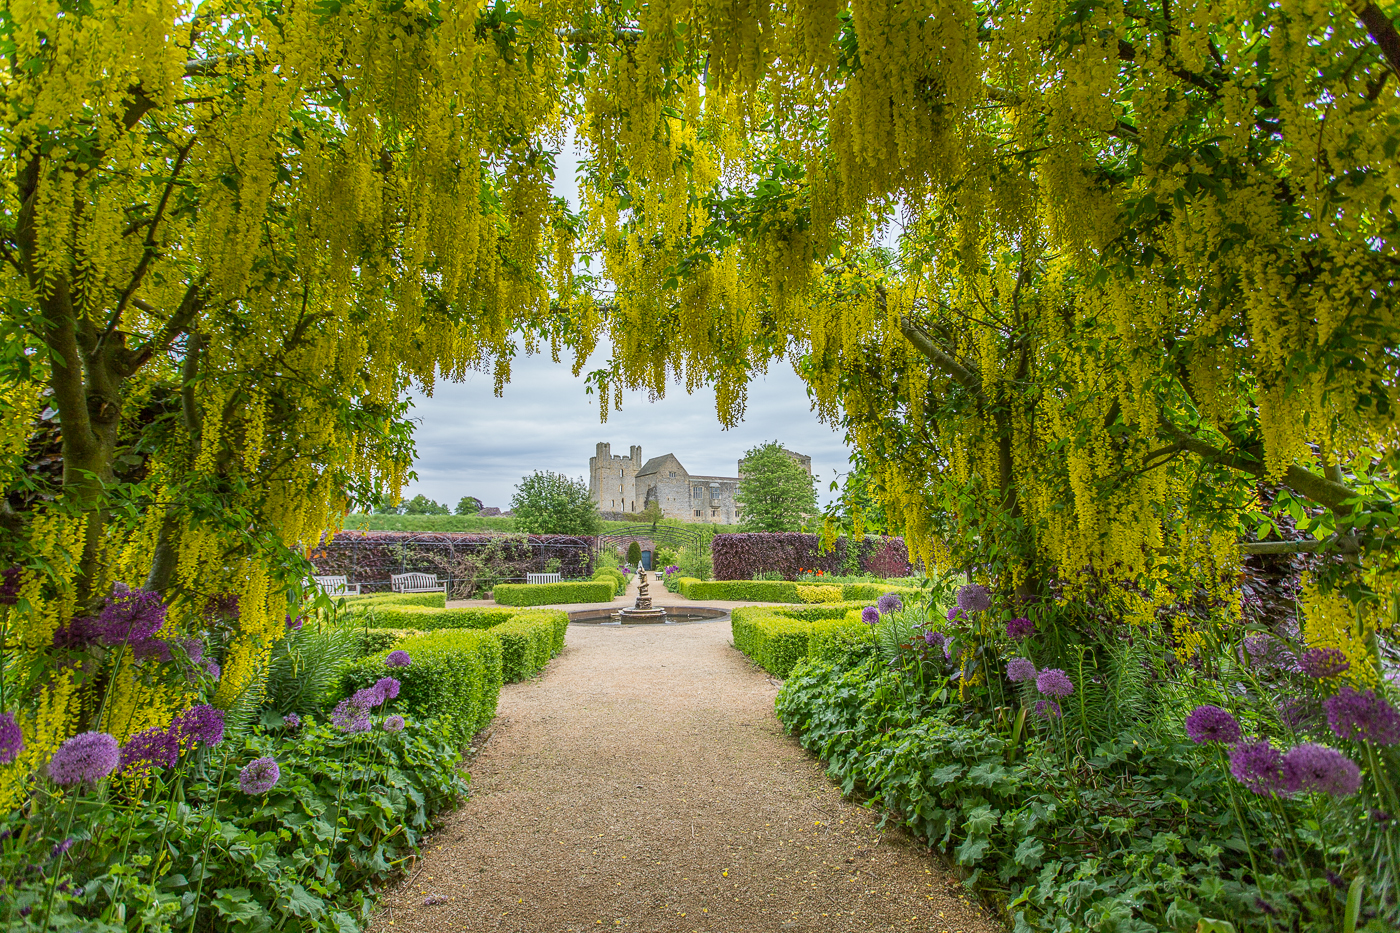 The Laburnum Arch is in bloom at the end of May and buzzes with bees.